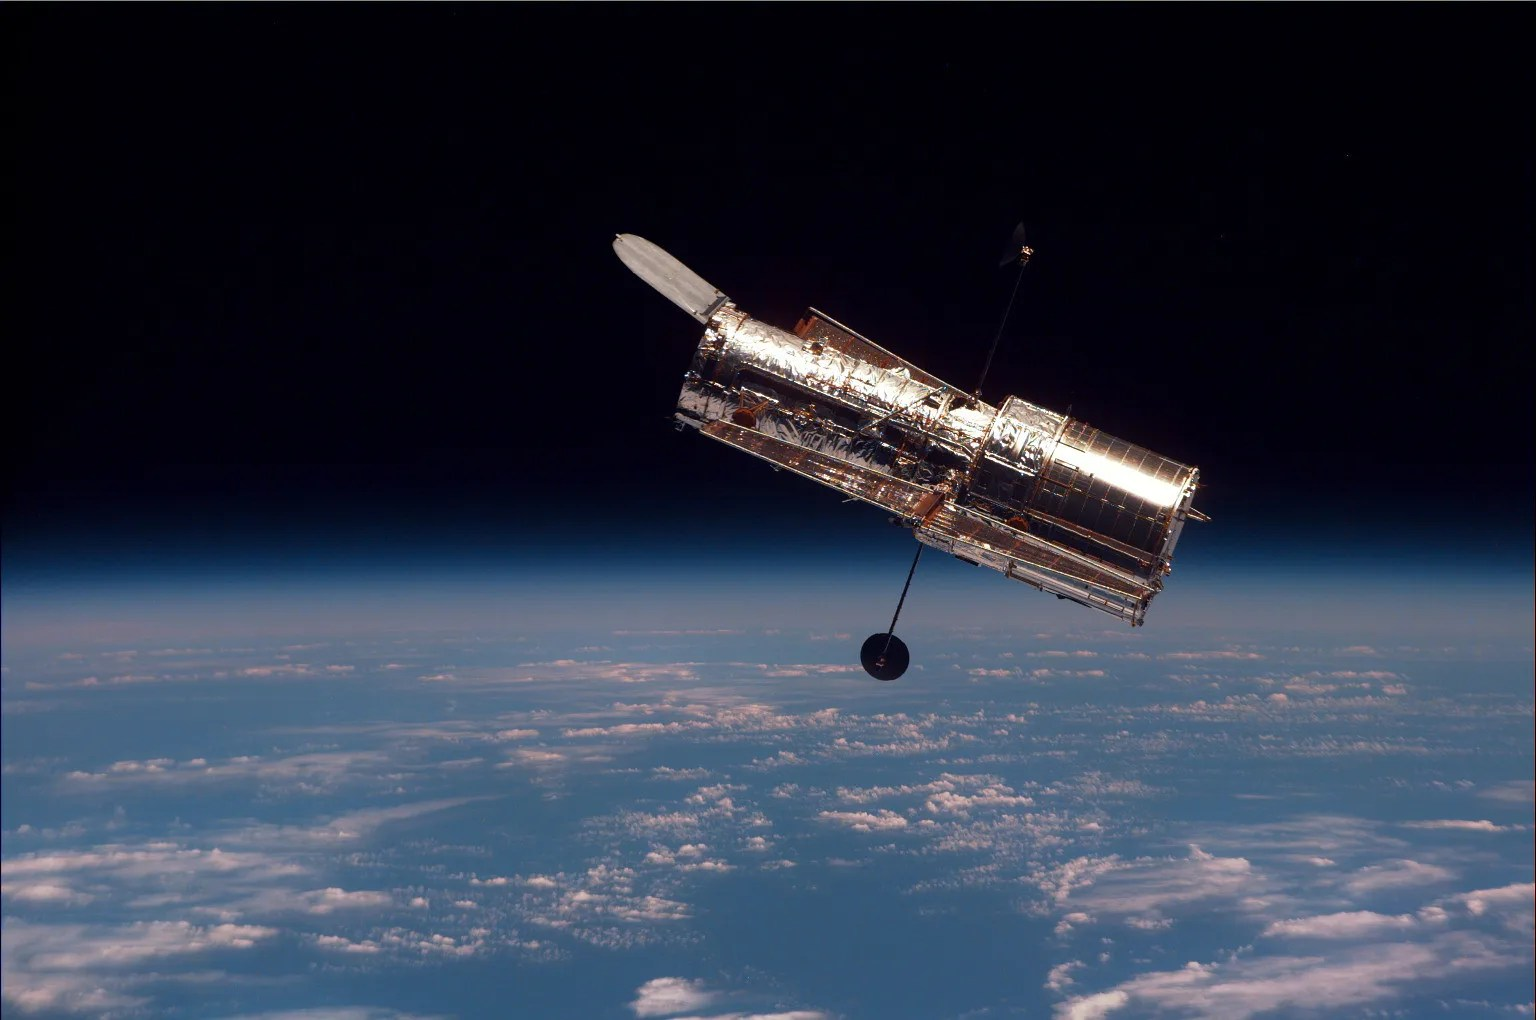 Hubble orbiting above earth